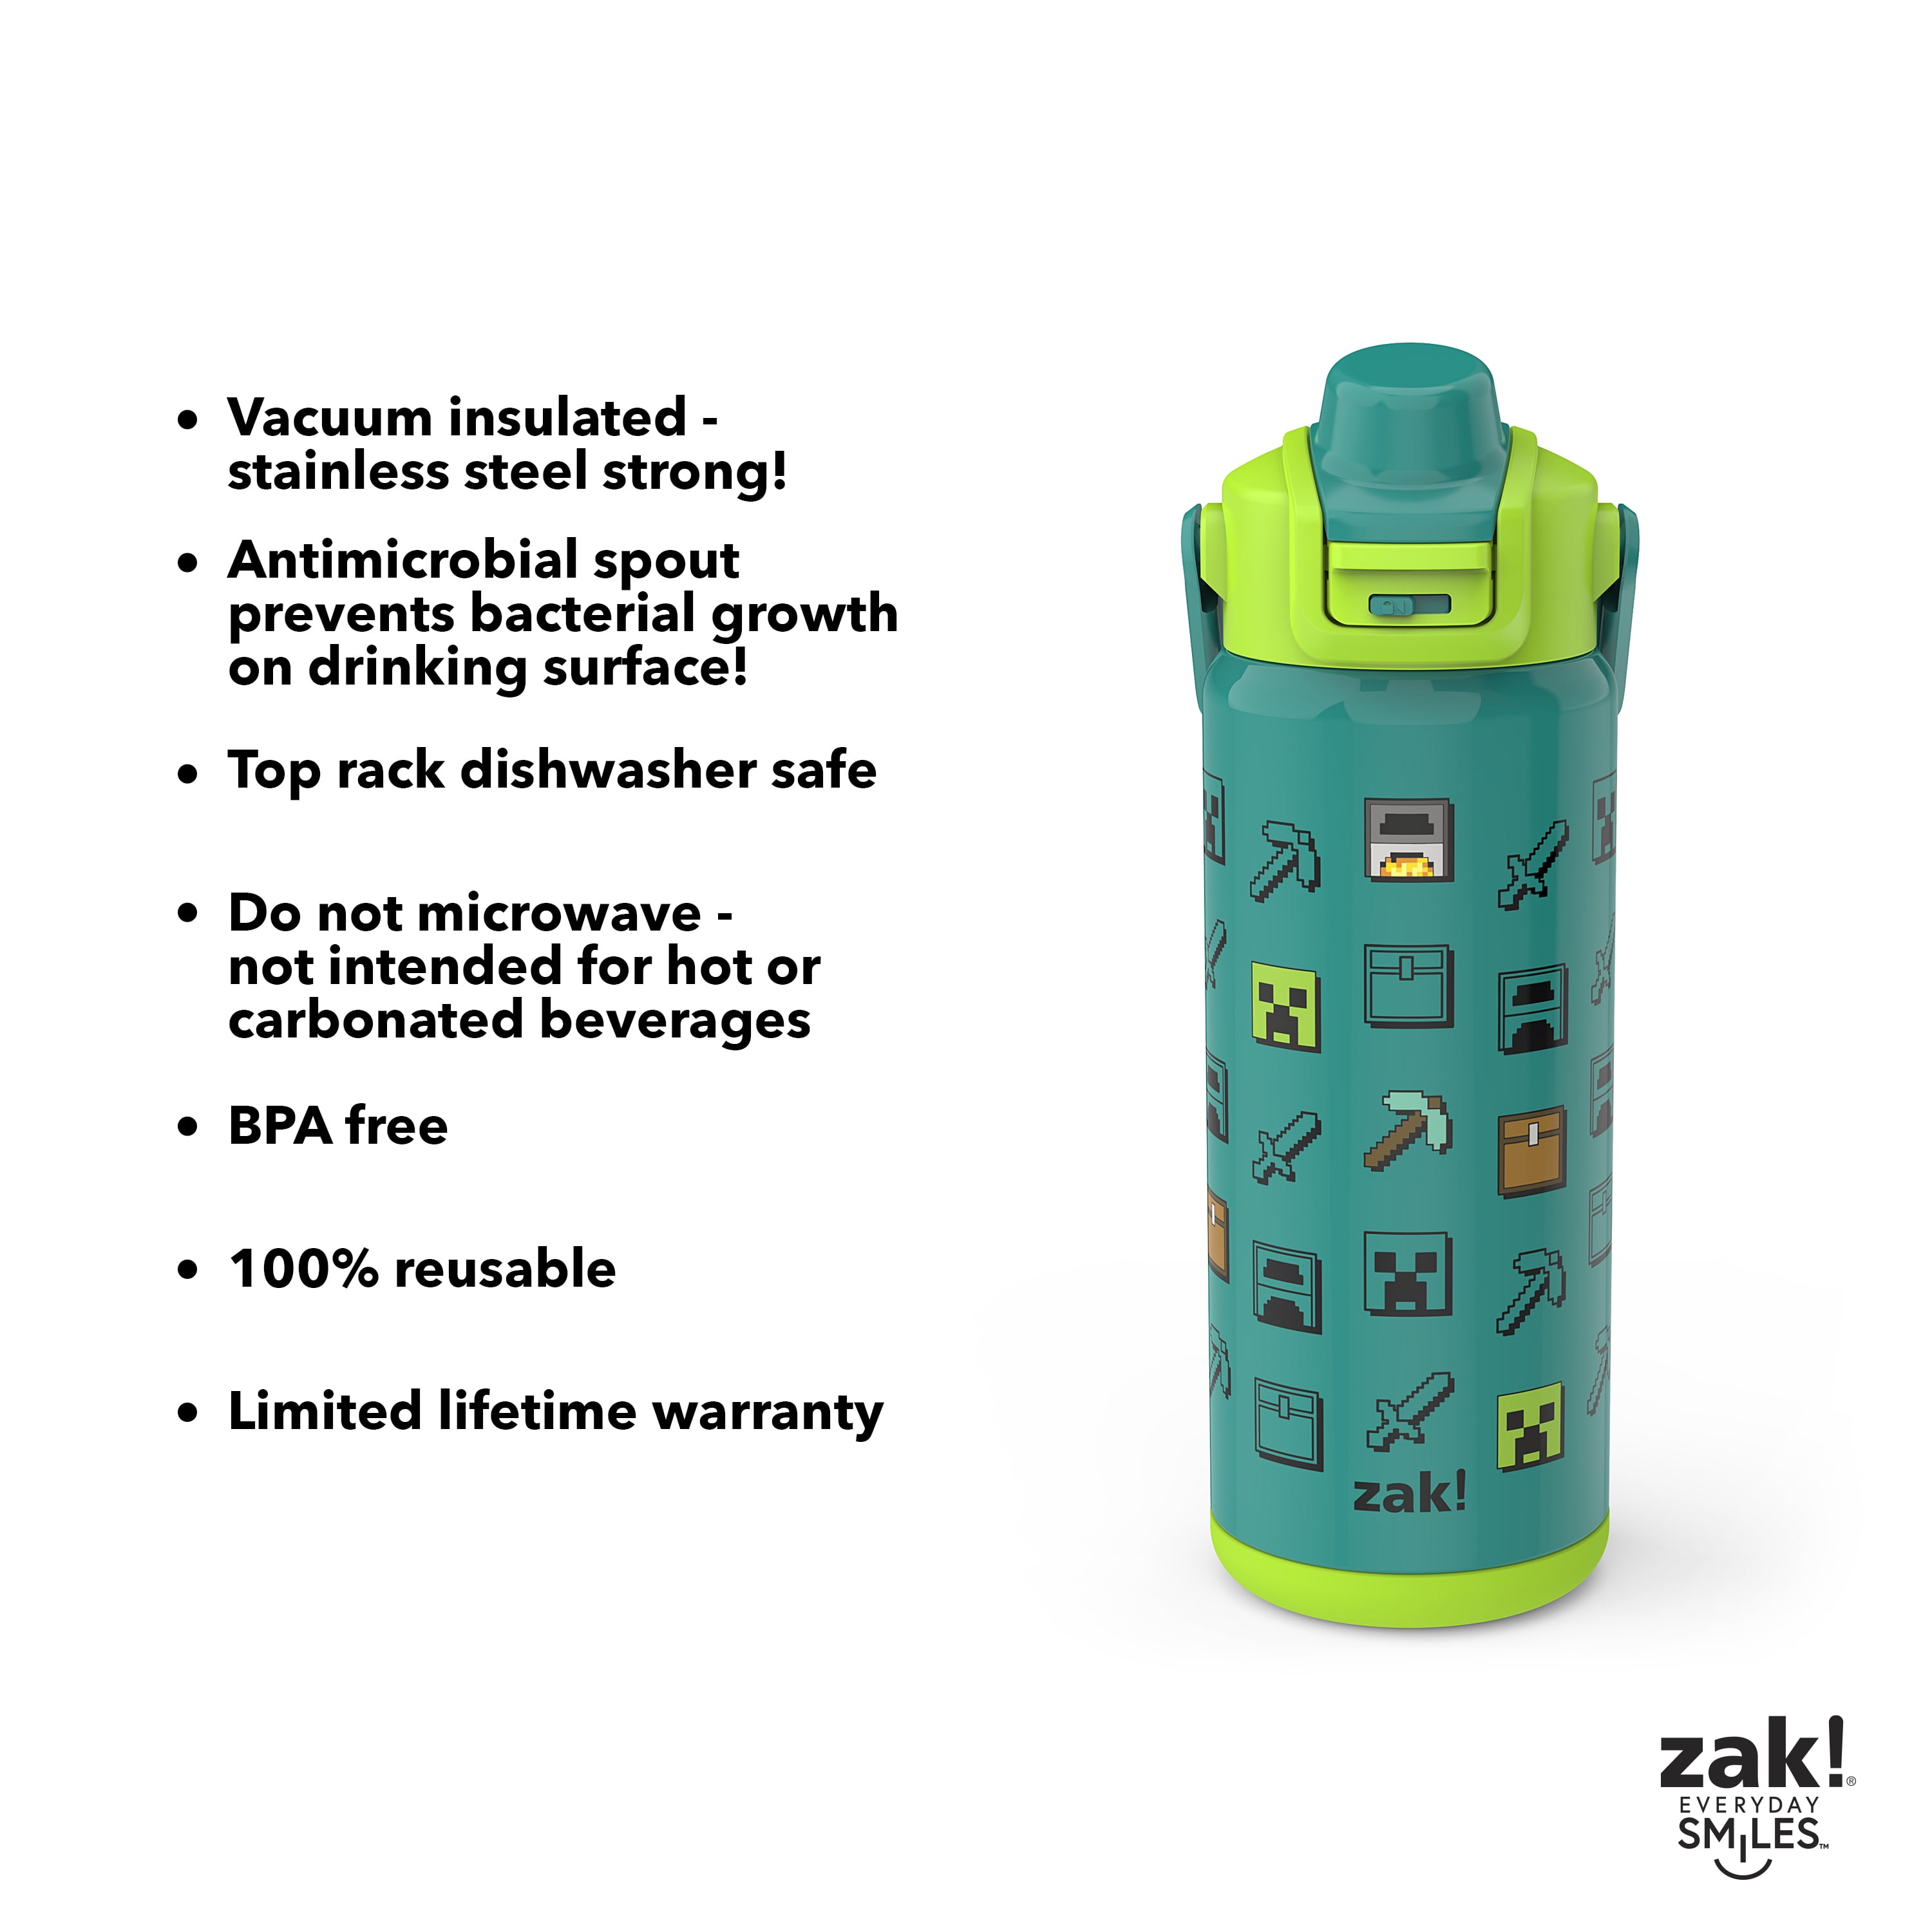 Minecraft Stainless Steel Water Bottles This water bottle is made of  break-resistant stainless steel that is durable and BPA-free as well…